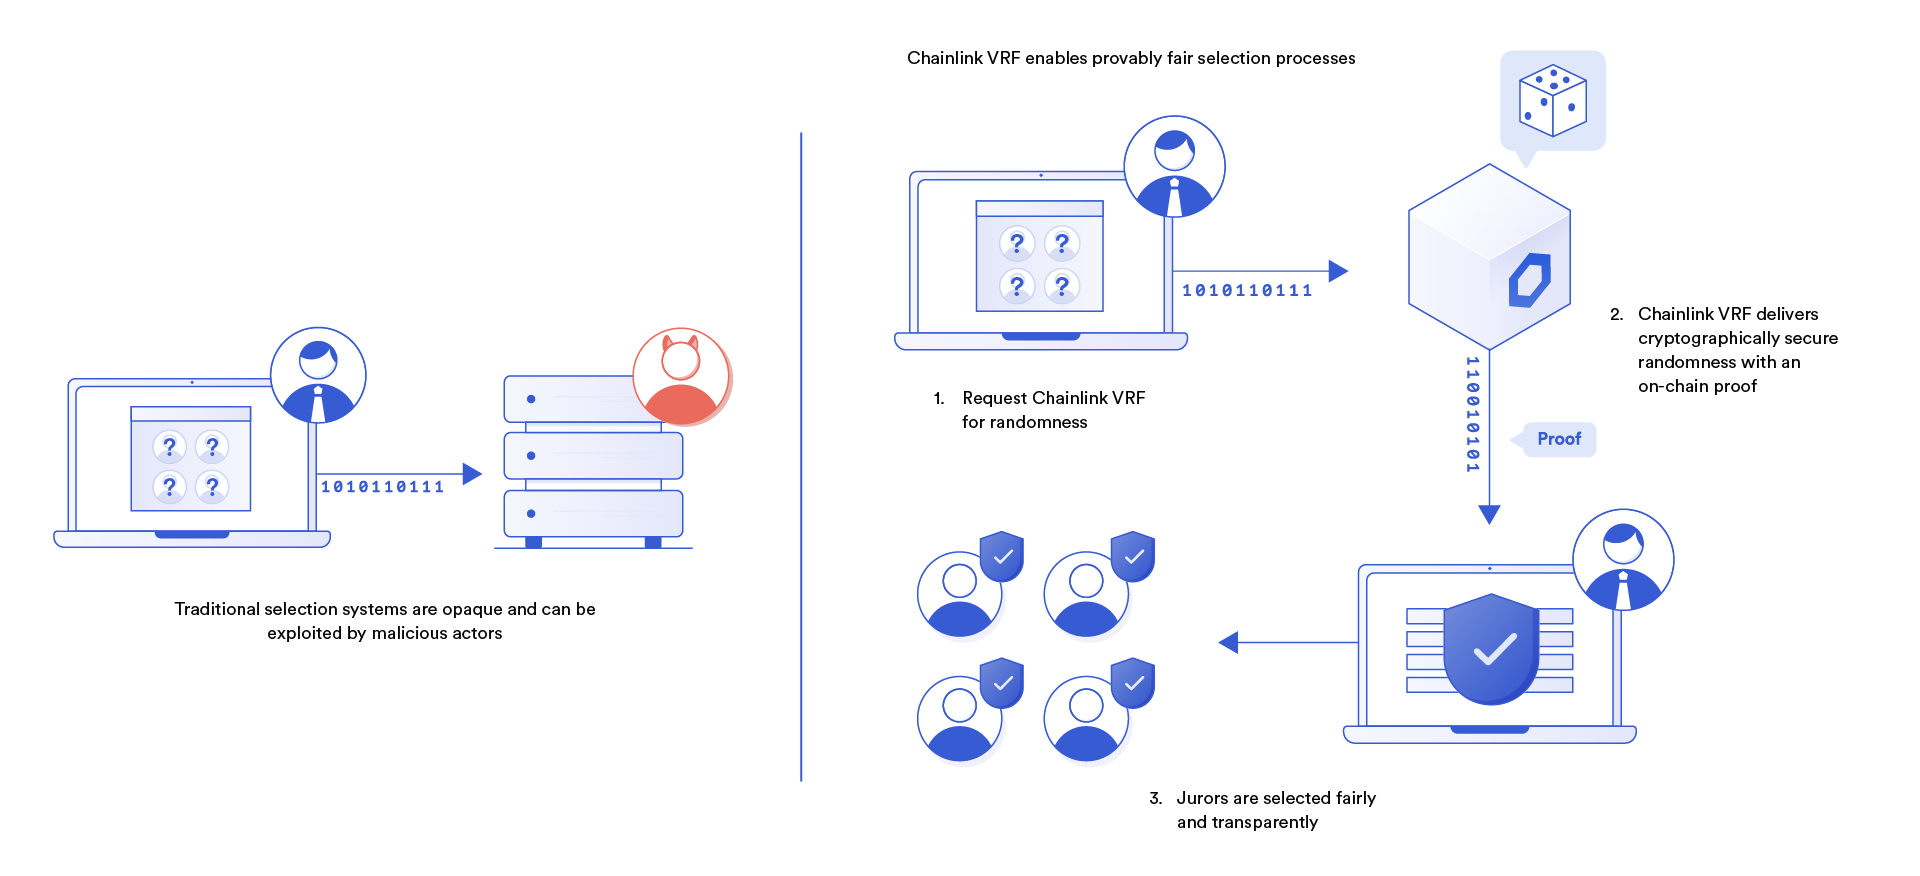 Chainlink VRF brings transparency to previously opaque selection processes.